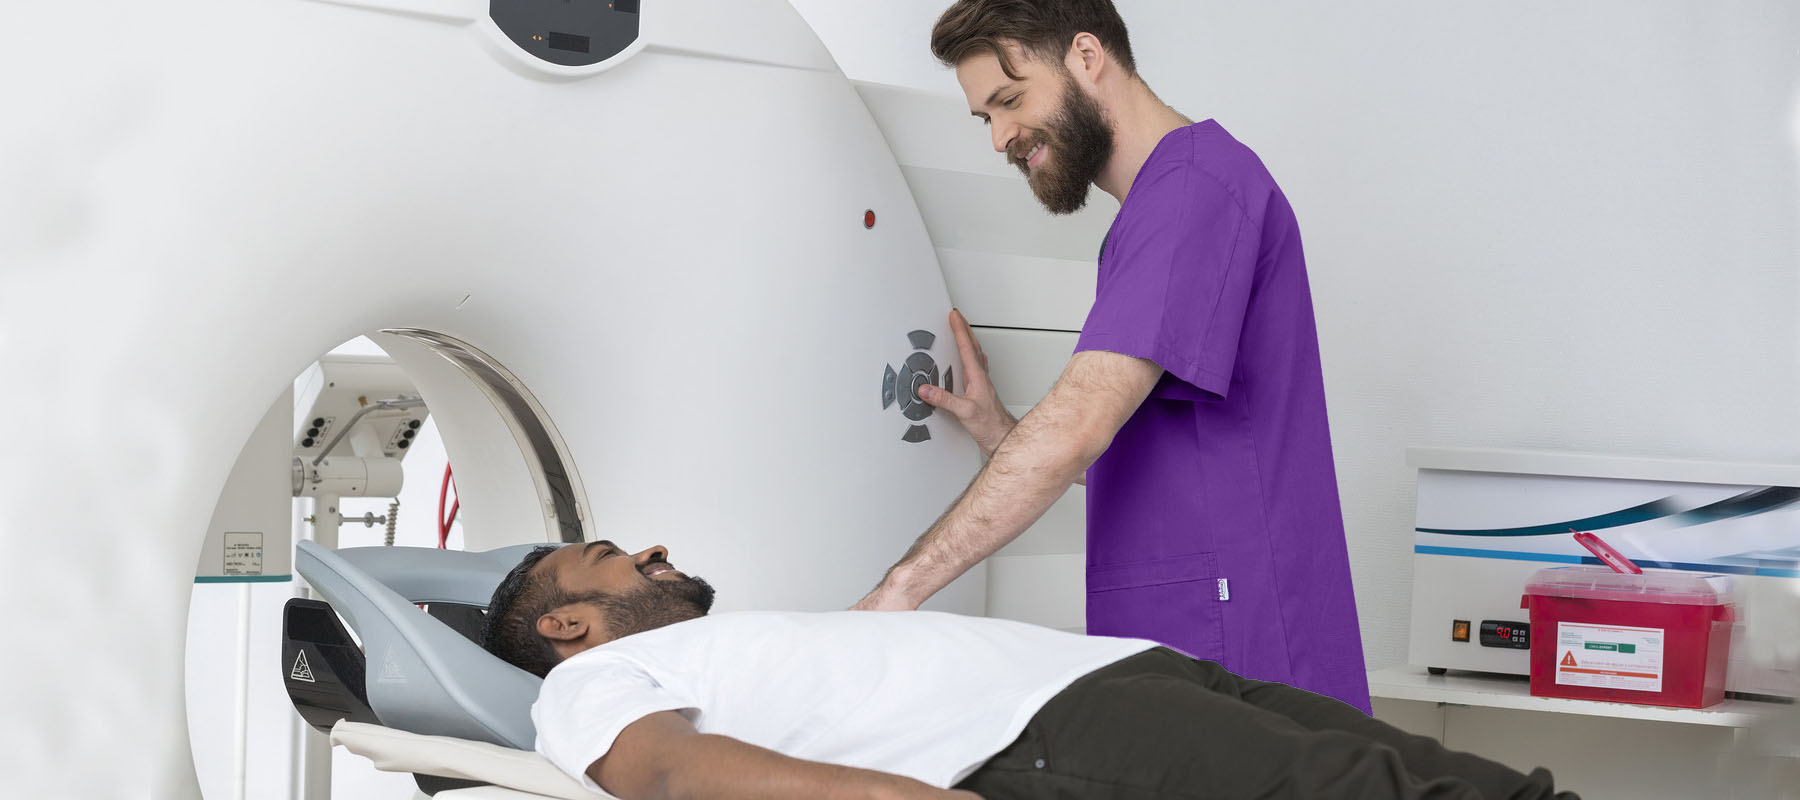 man wearing purple scrubs prepares a patient for a CT